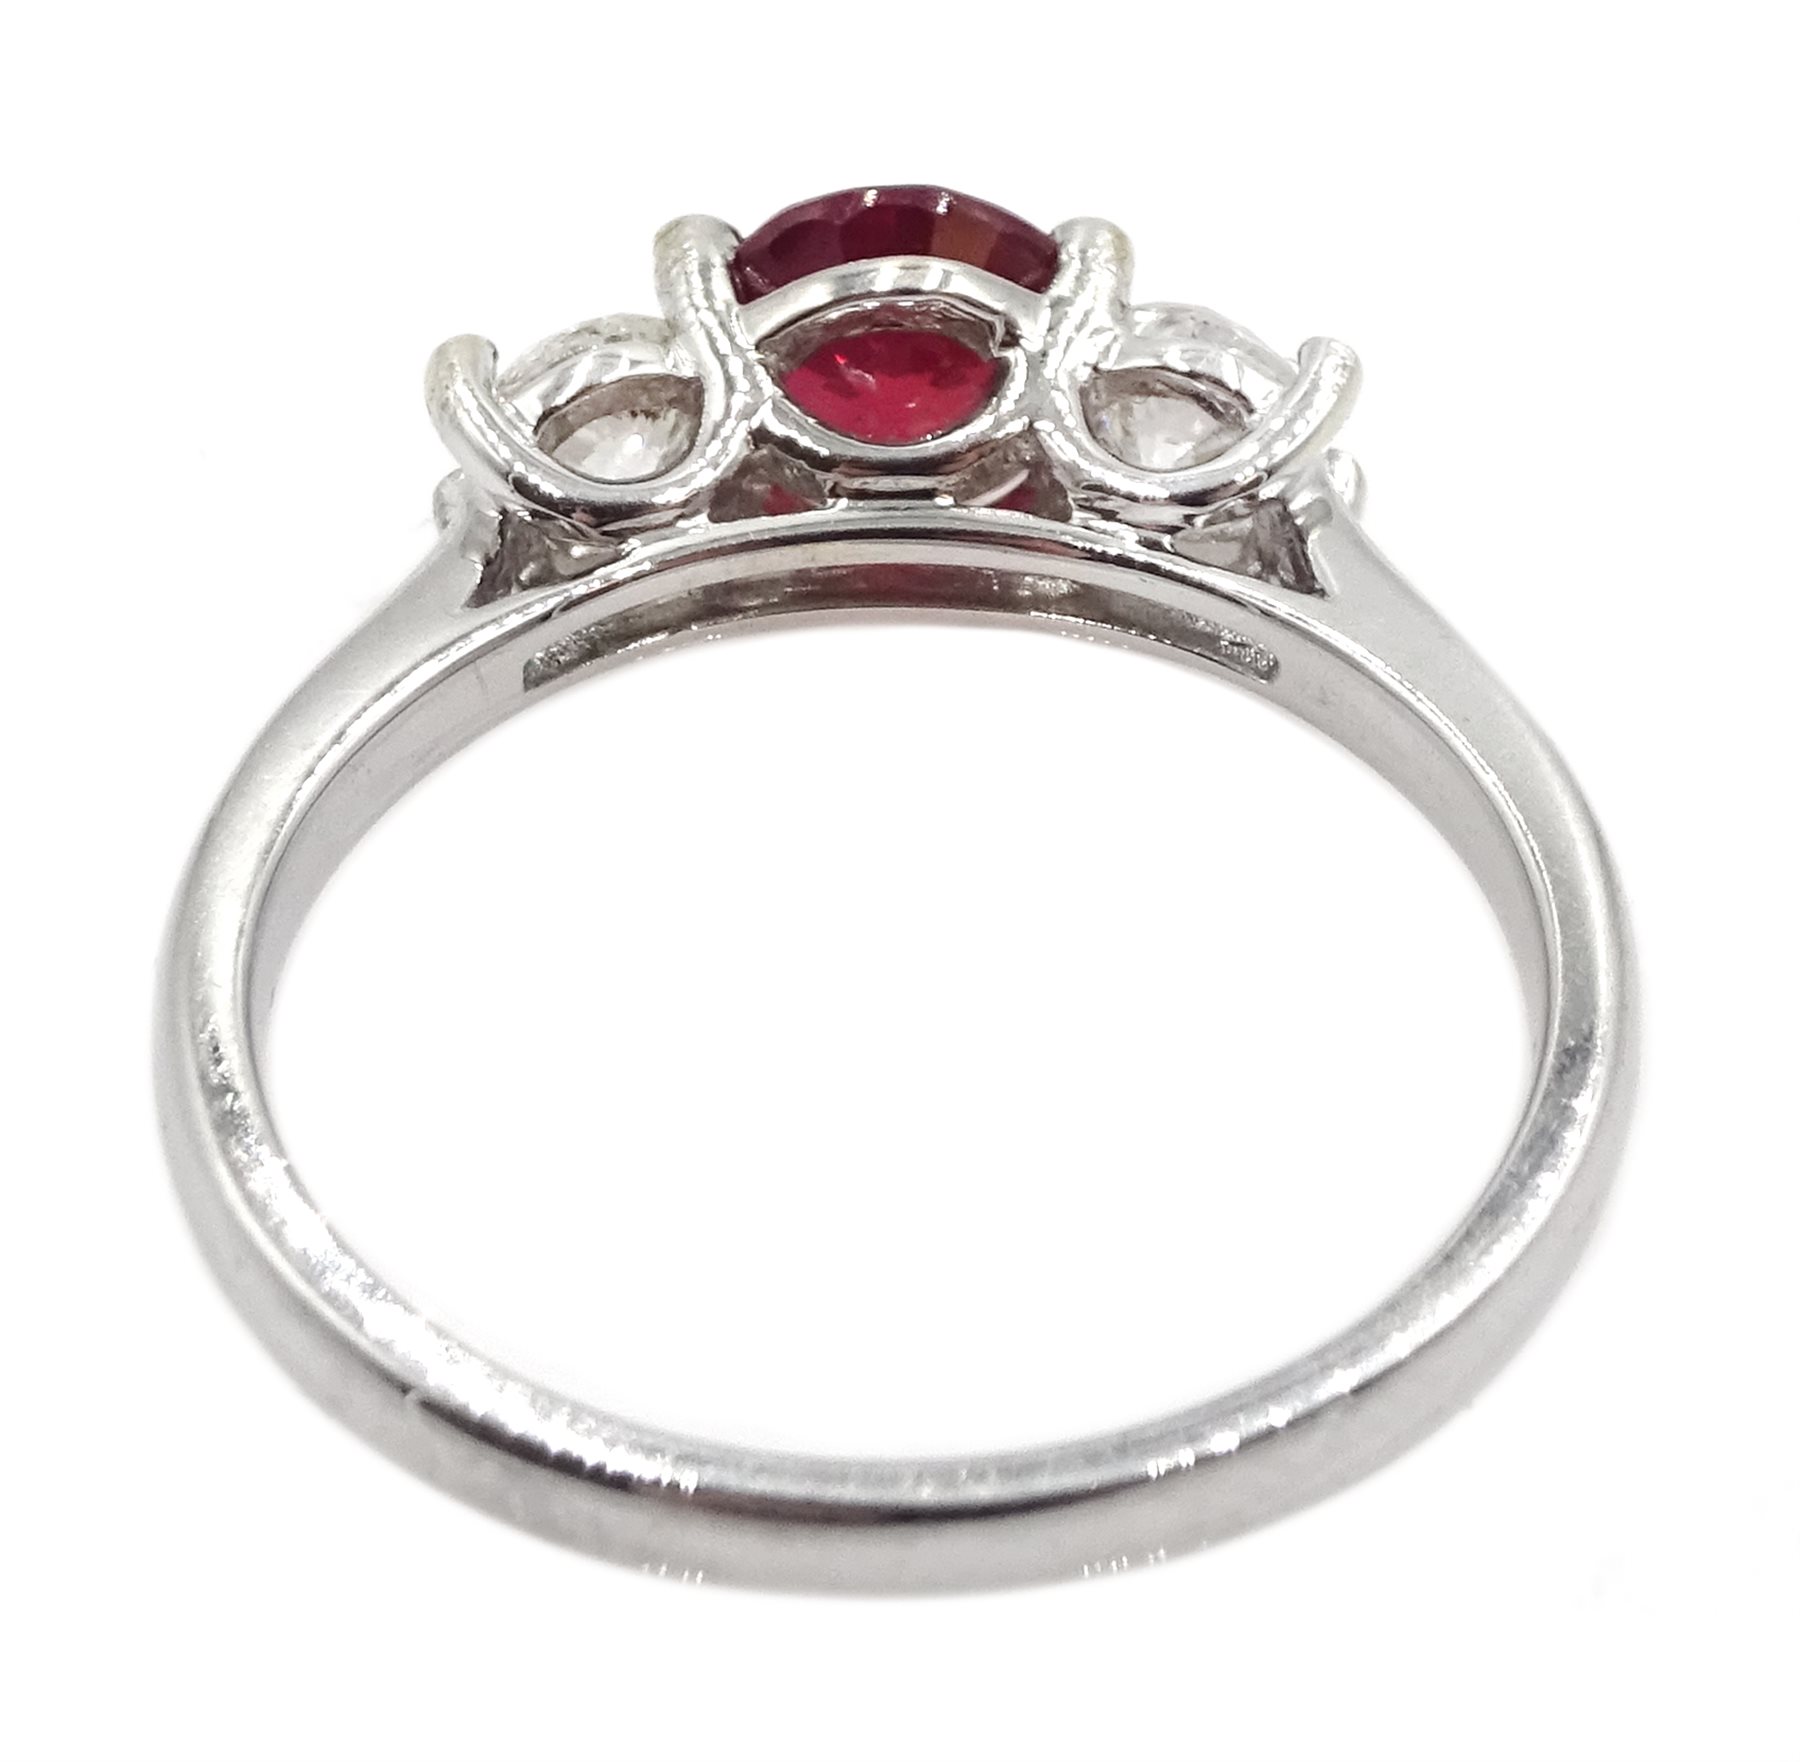 18ct white gold three stone ruby and diamond ring, hallmarked, ruby approx 0.95 carat - Image 5 of 5